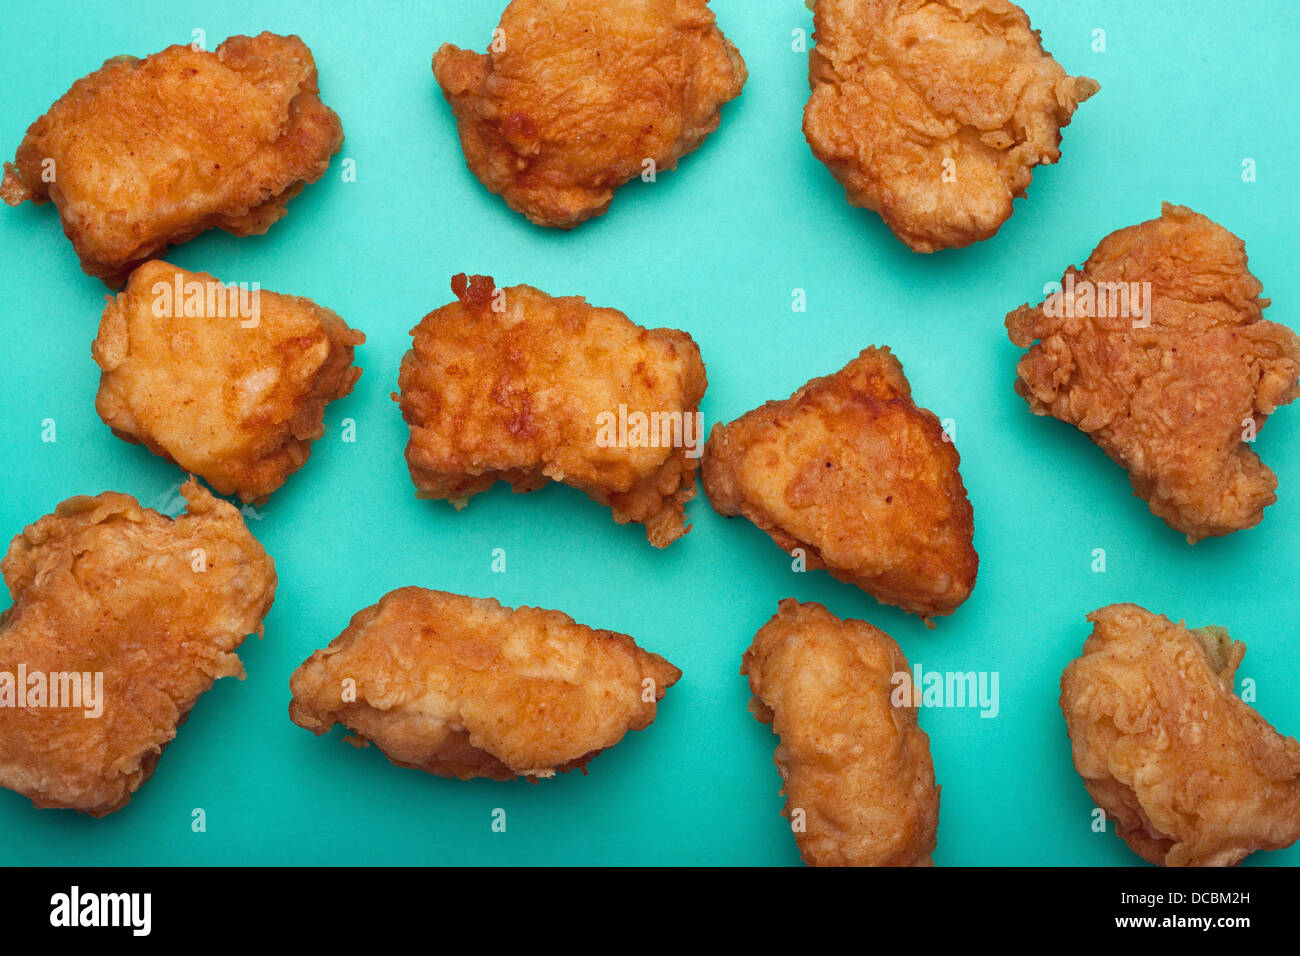 Boneless chicken wings on teal surface Stock Photo